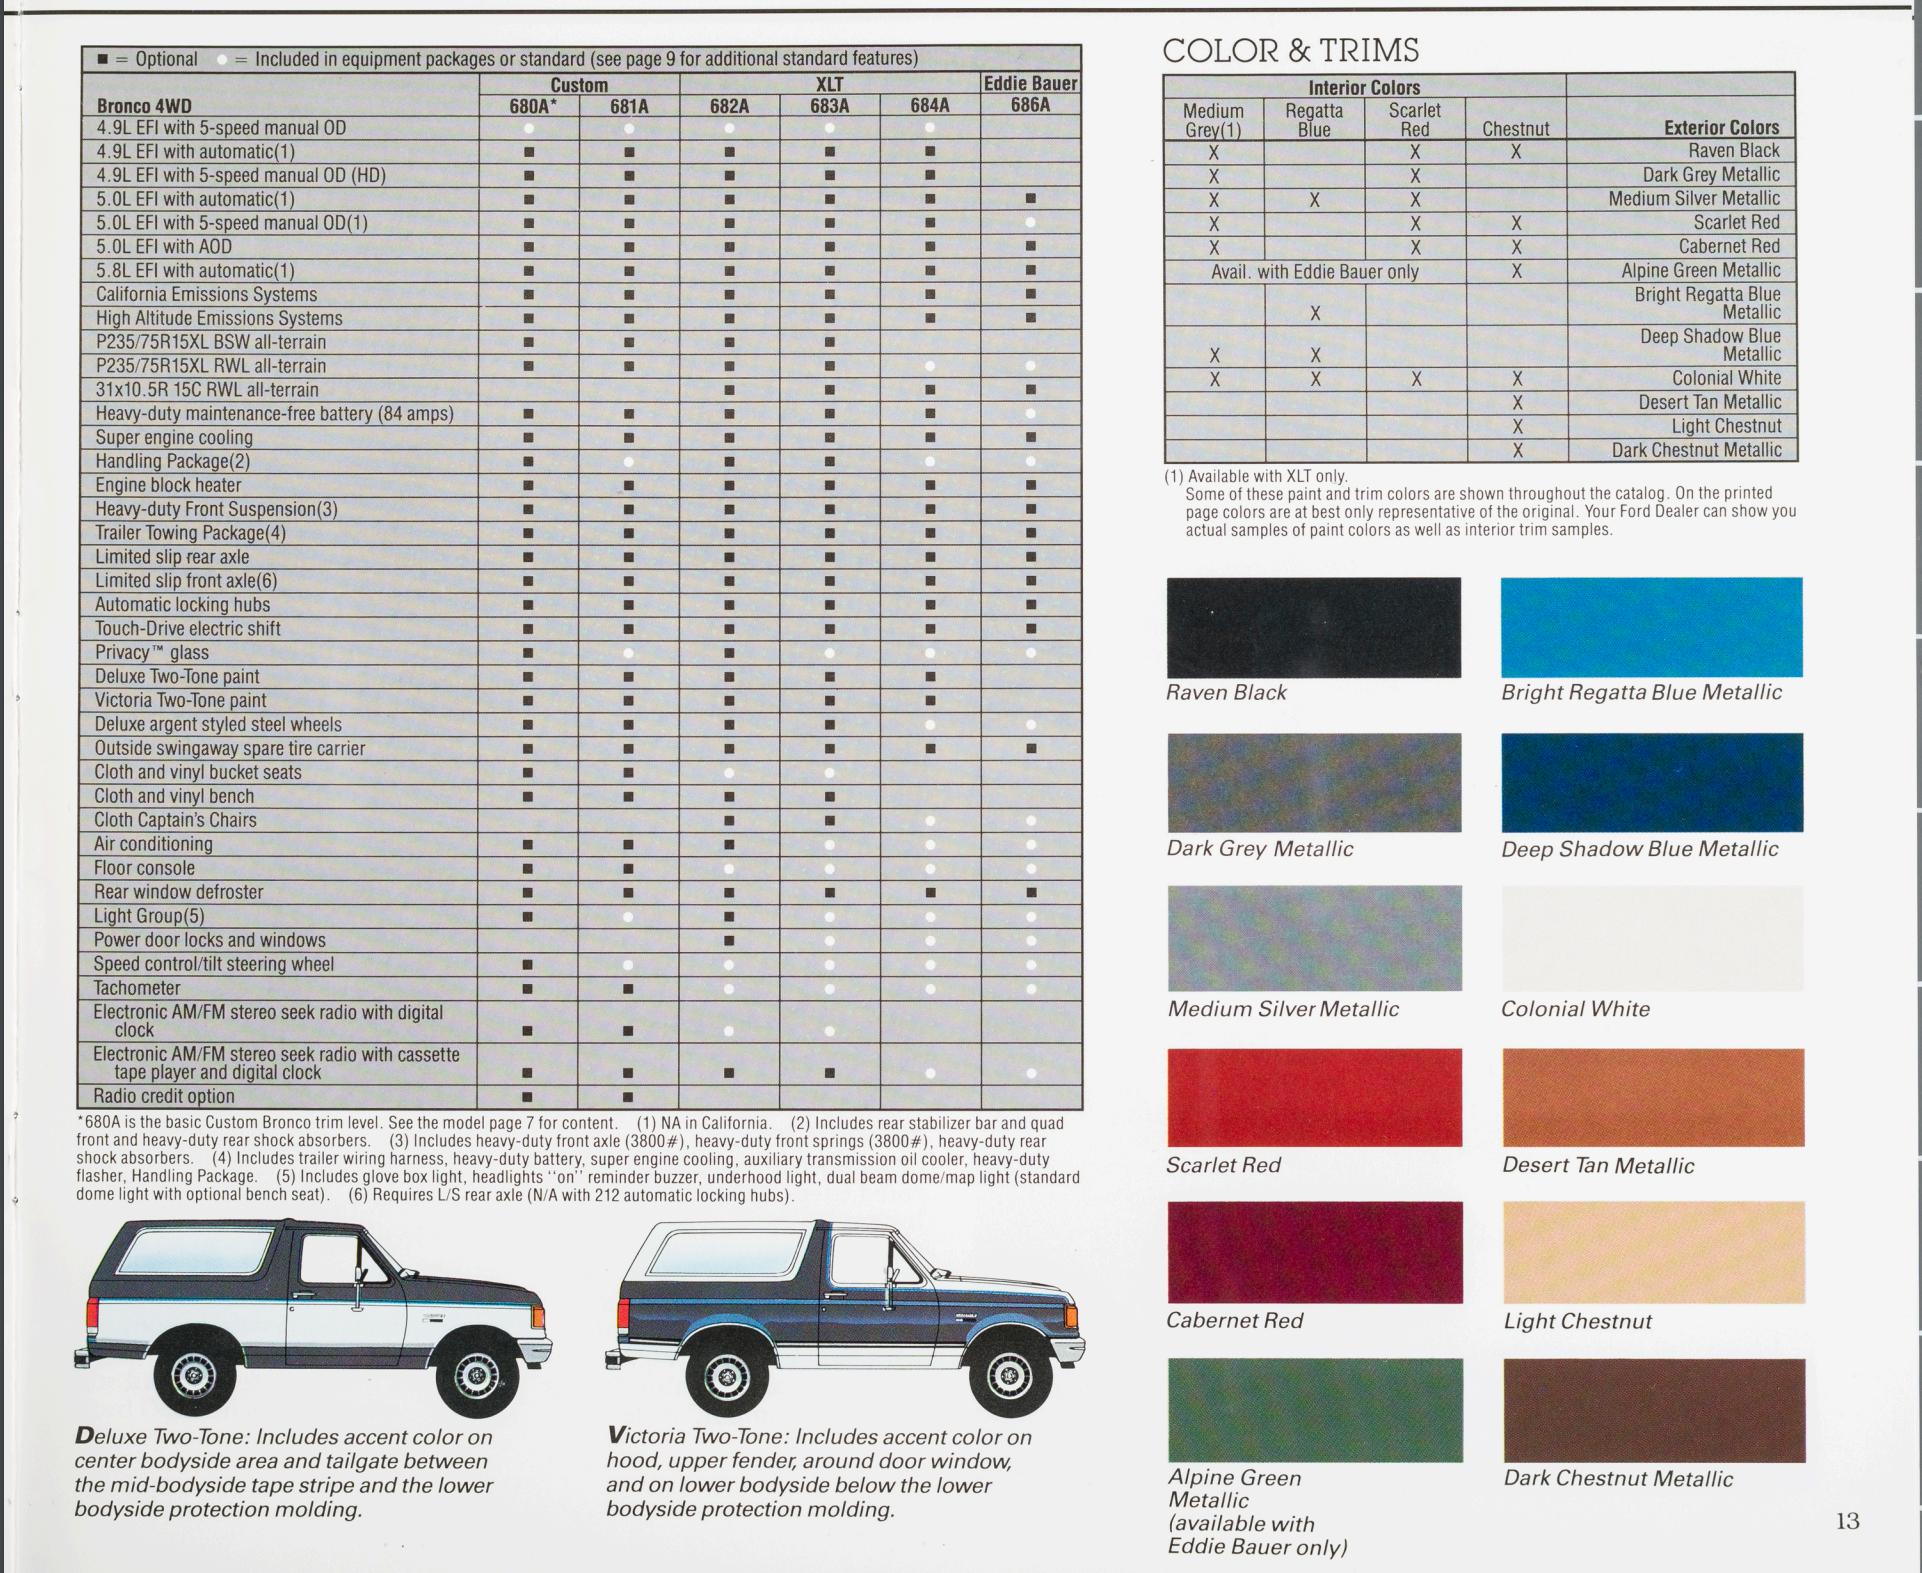 Ford Bronco exterior color examples used on all models